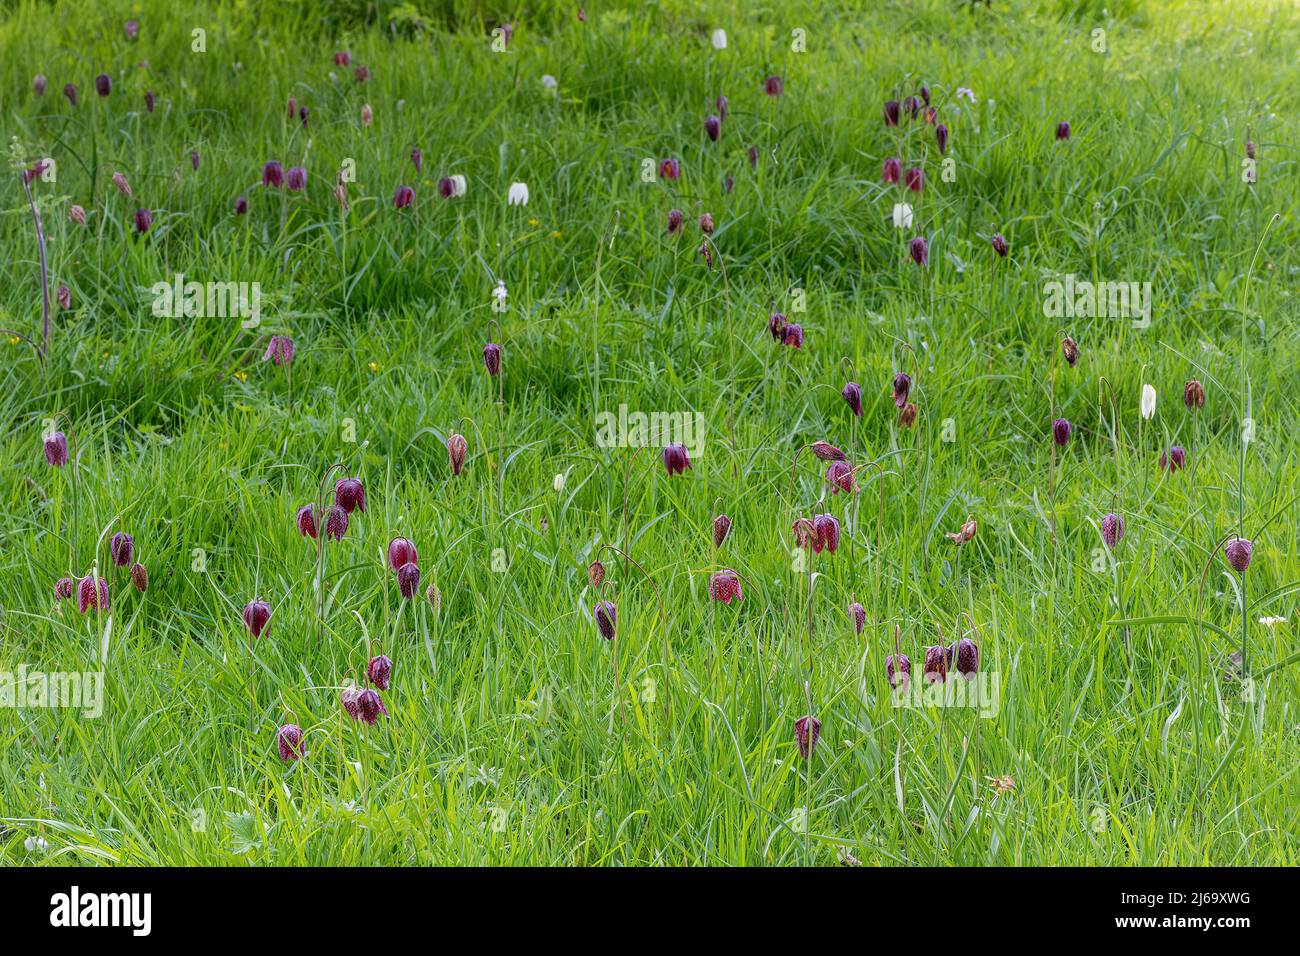 Snakeshead fritillary meadow at Waterperry Gardens, Oxfordshire, England, UK, during April or spring Stock Photo